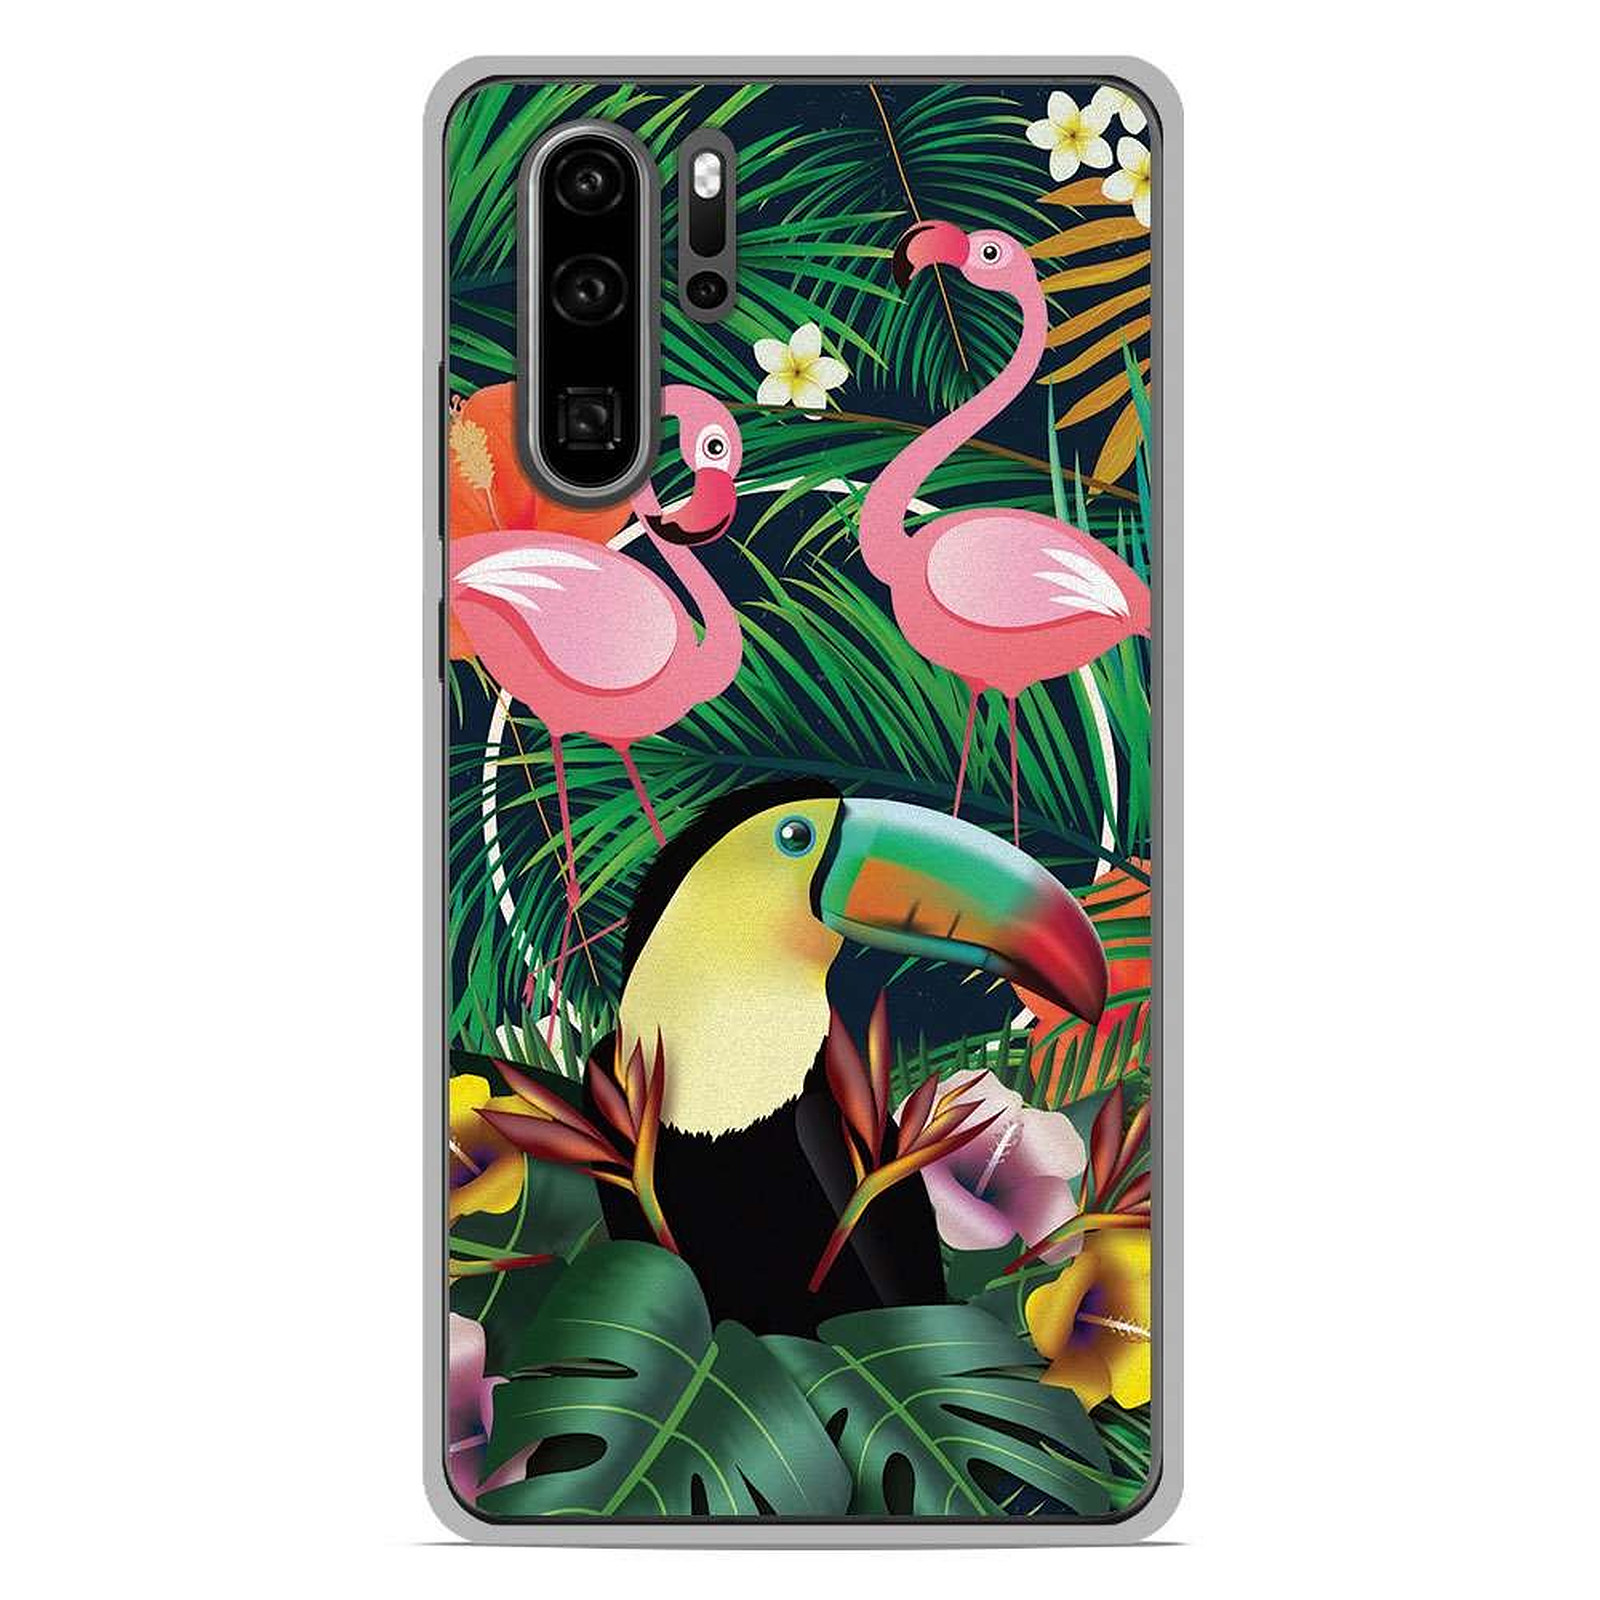 1001 Coques Coque silicone gel Huawei P30 Pro motif Tropical Toucan - Coque telephone 1001Coques